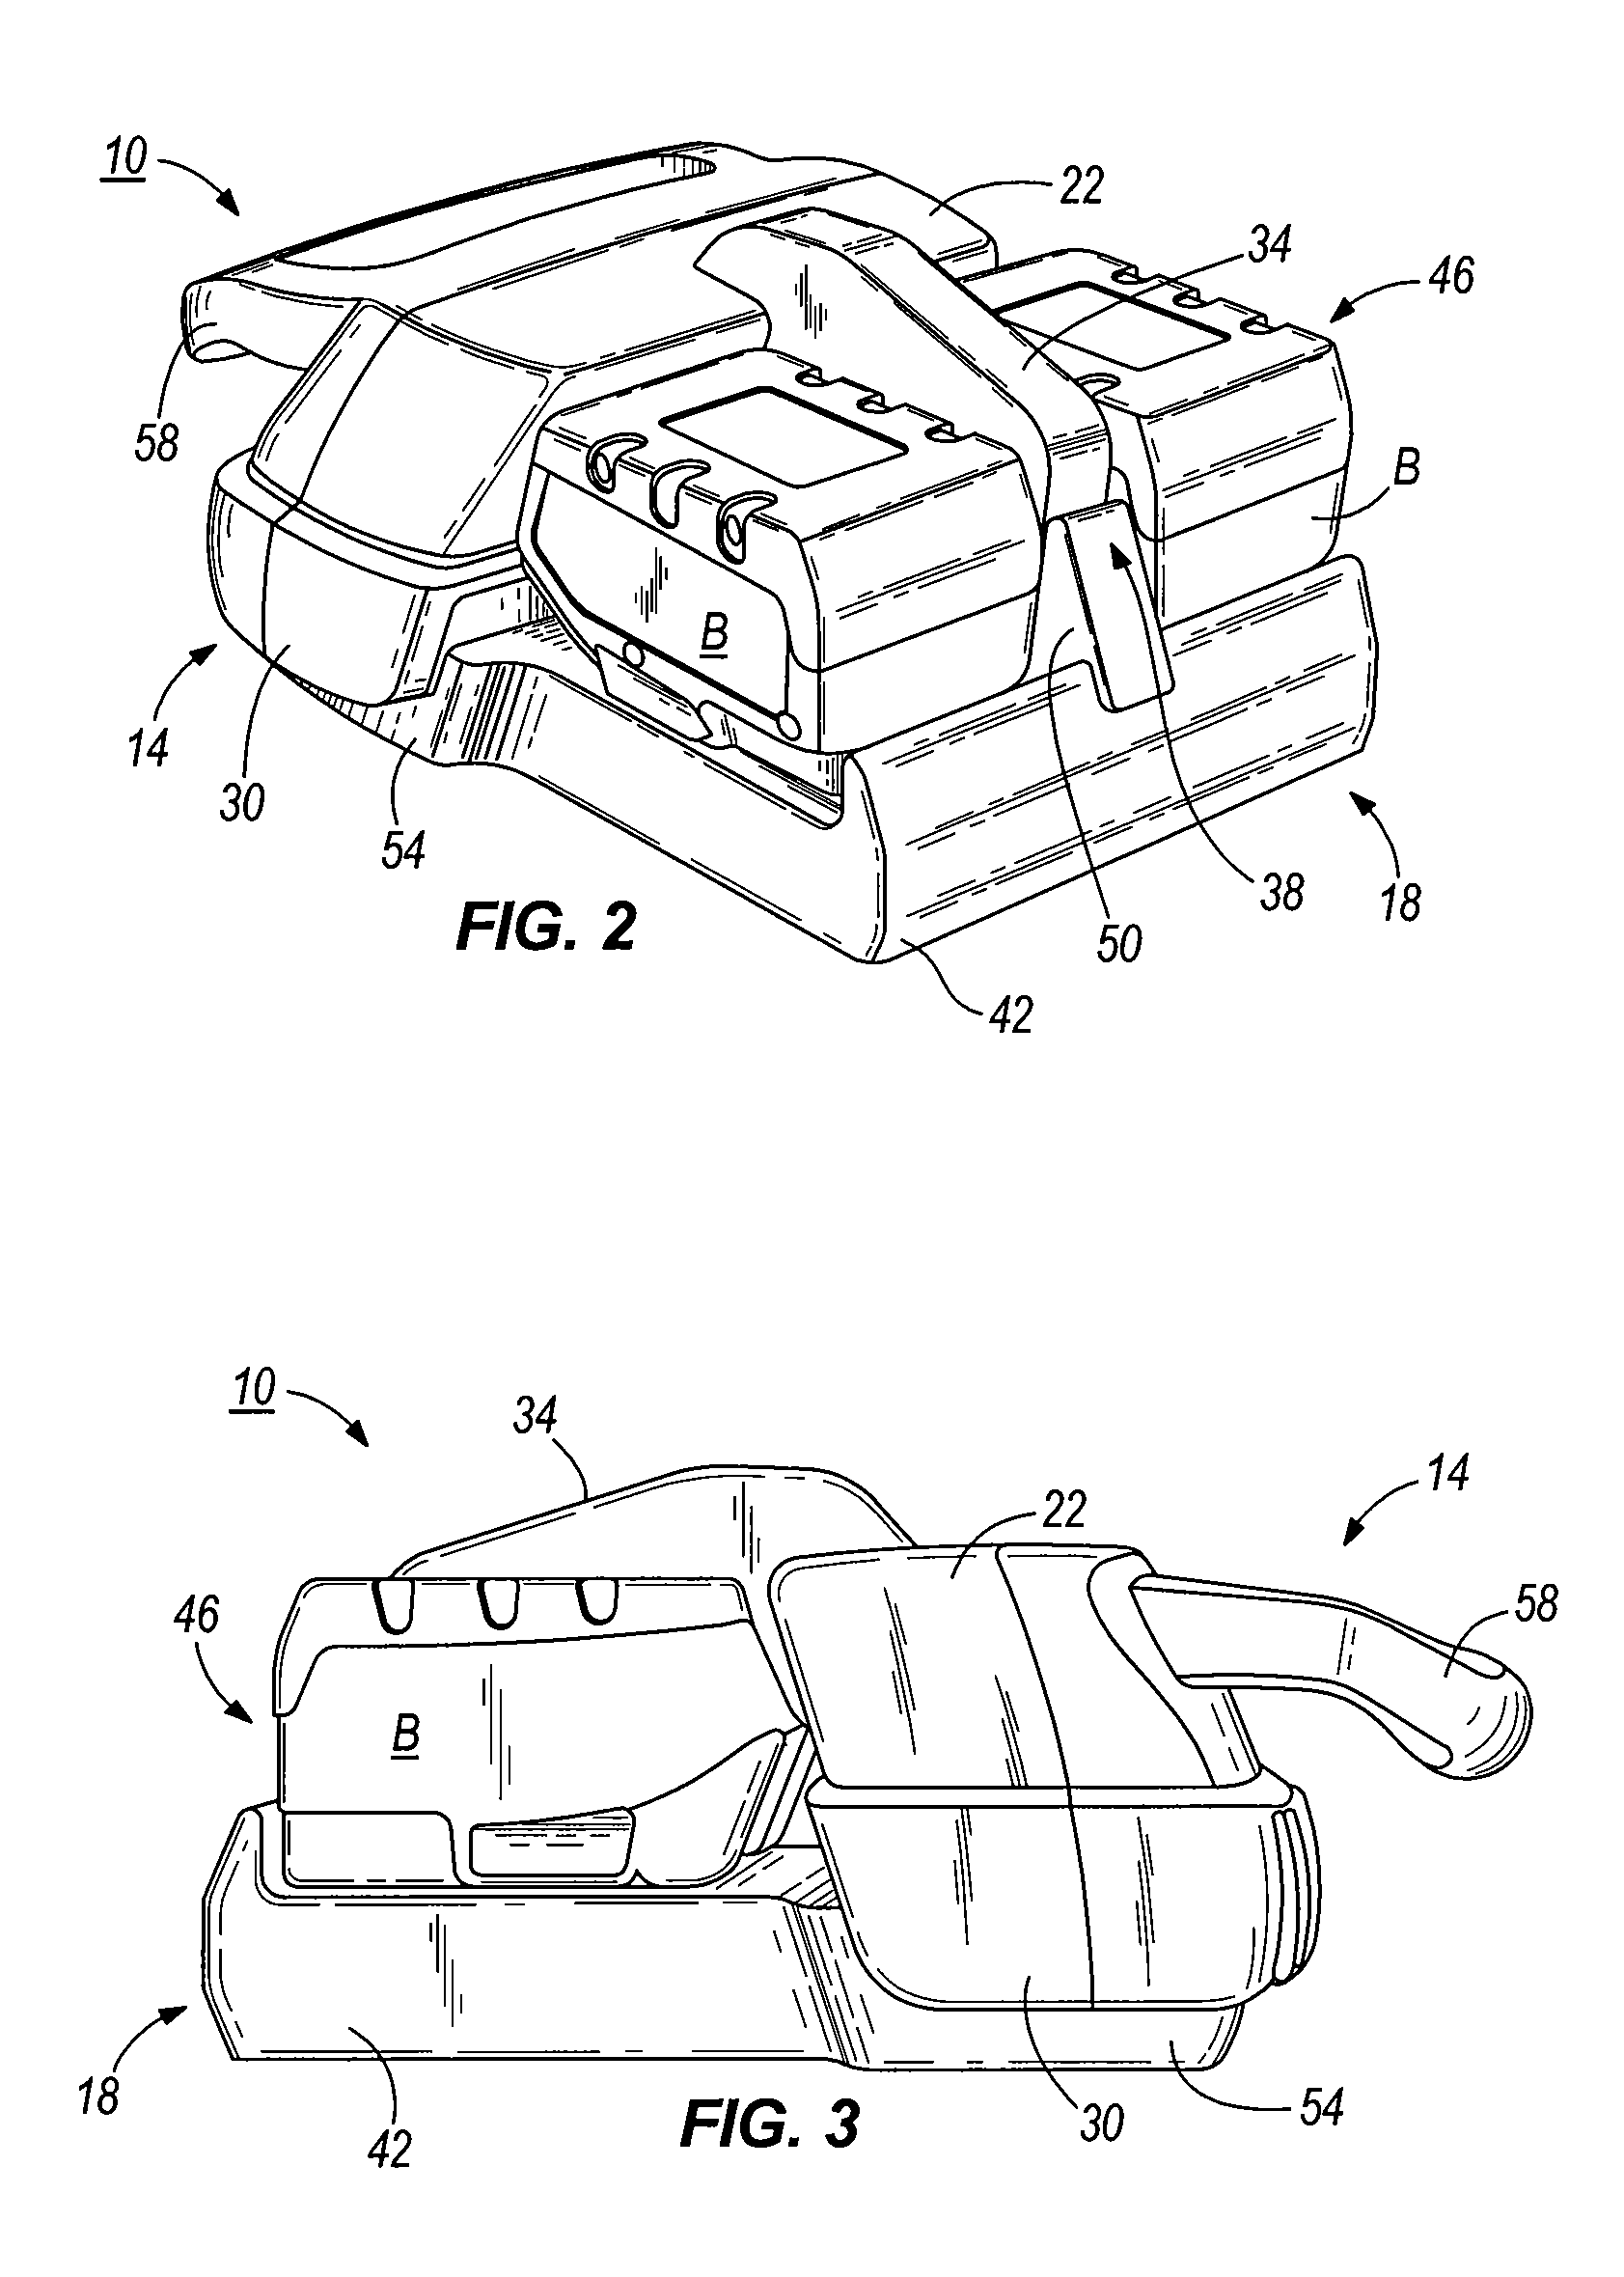 Electrical component, such as a lighting unit and battery charger assembly